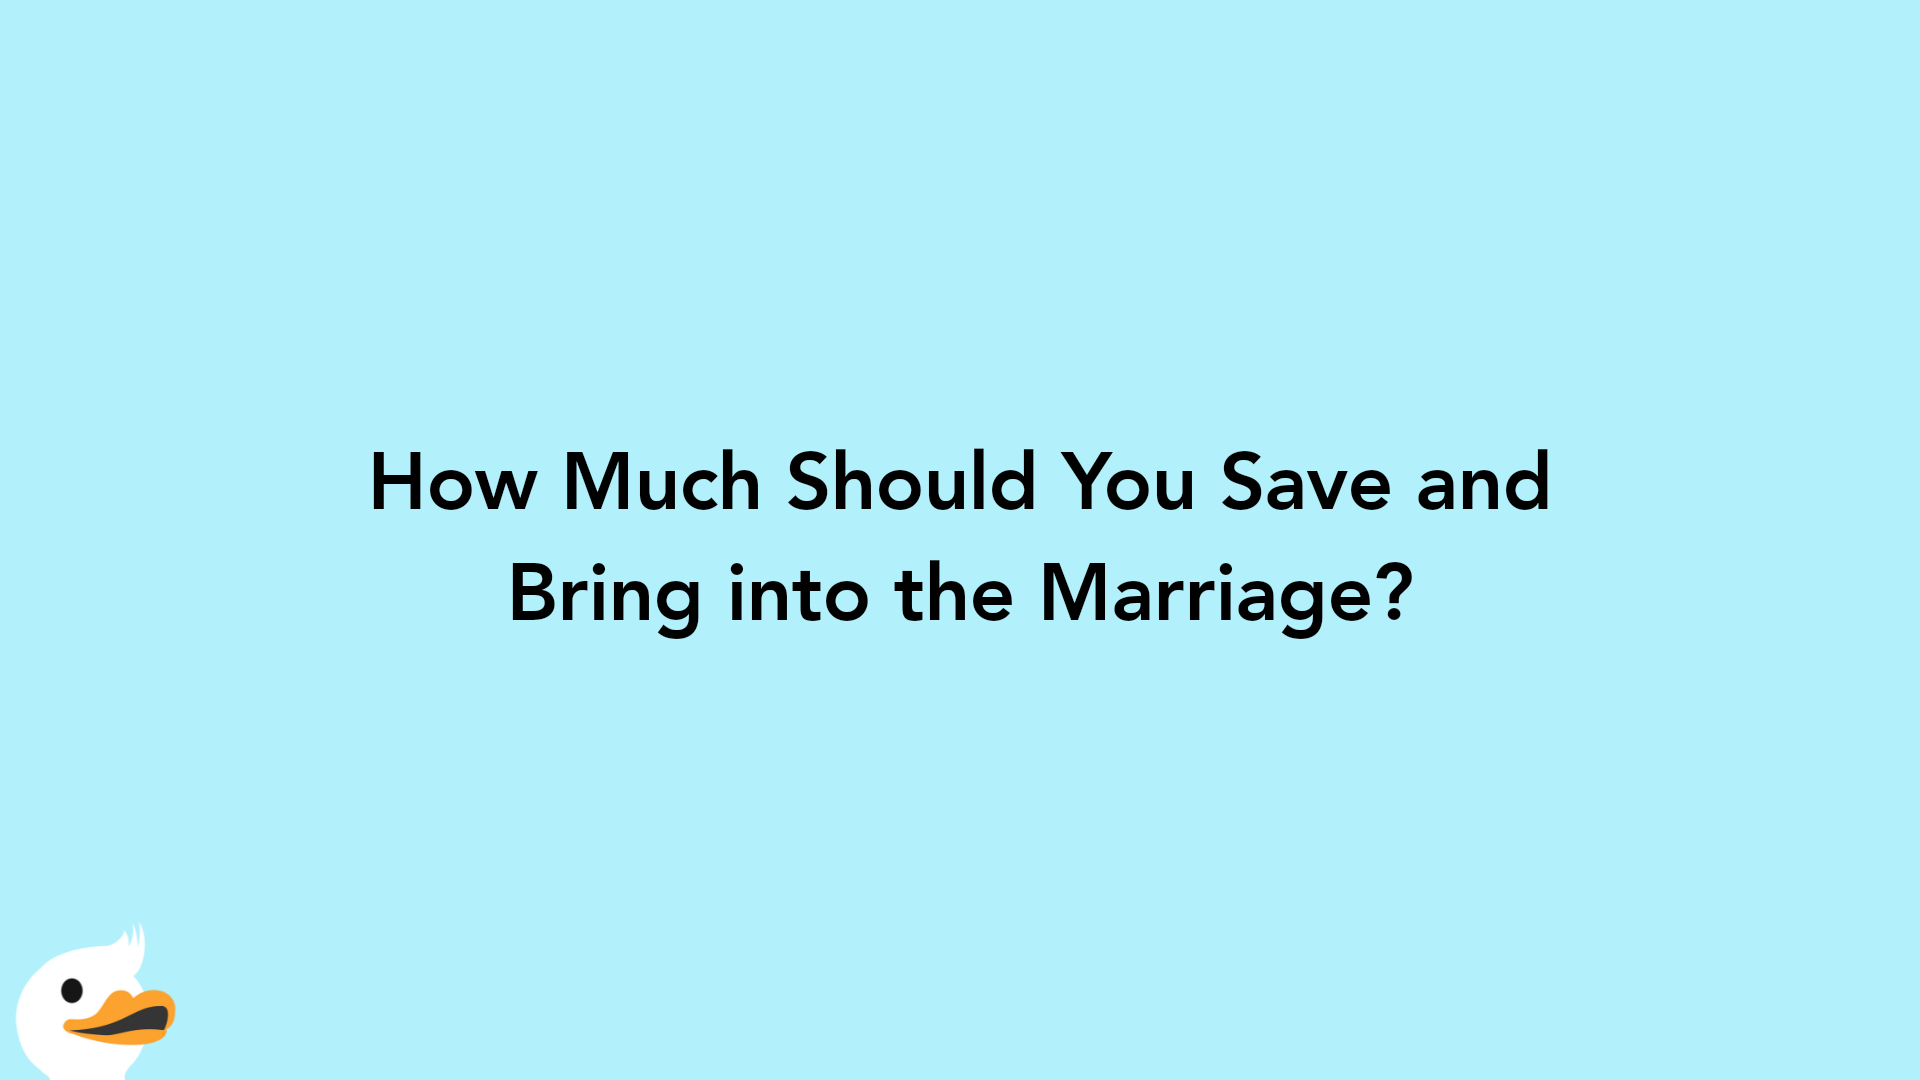 How Much Should You Save and Bring into the Marriage?